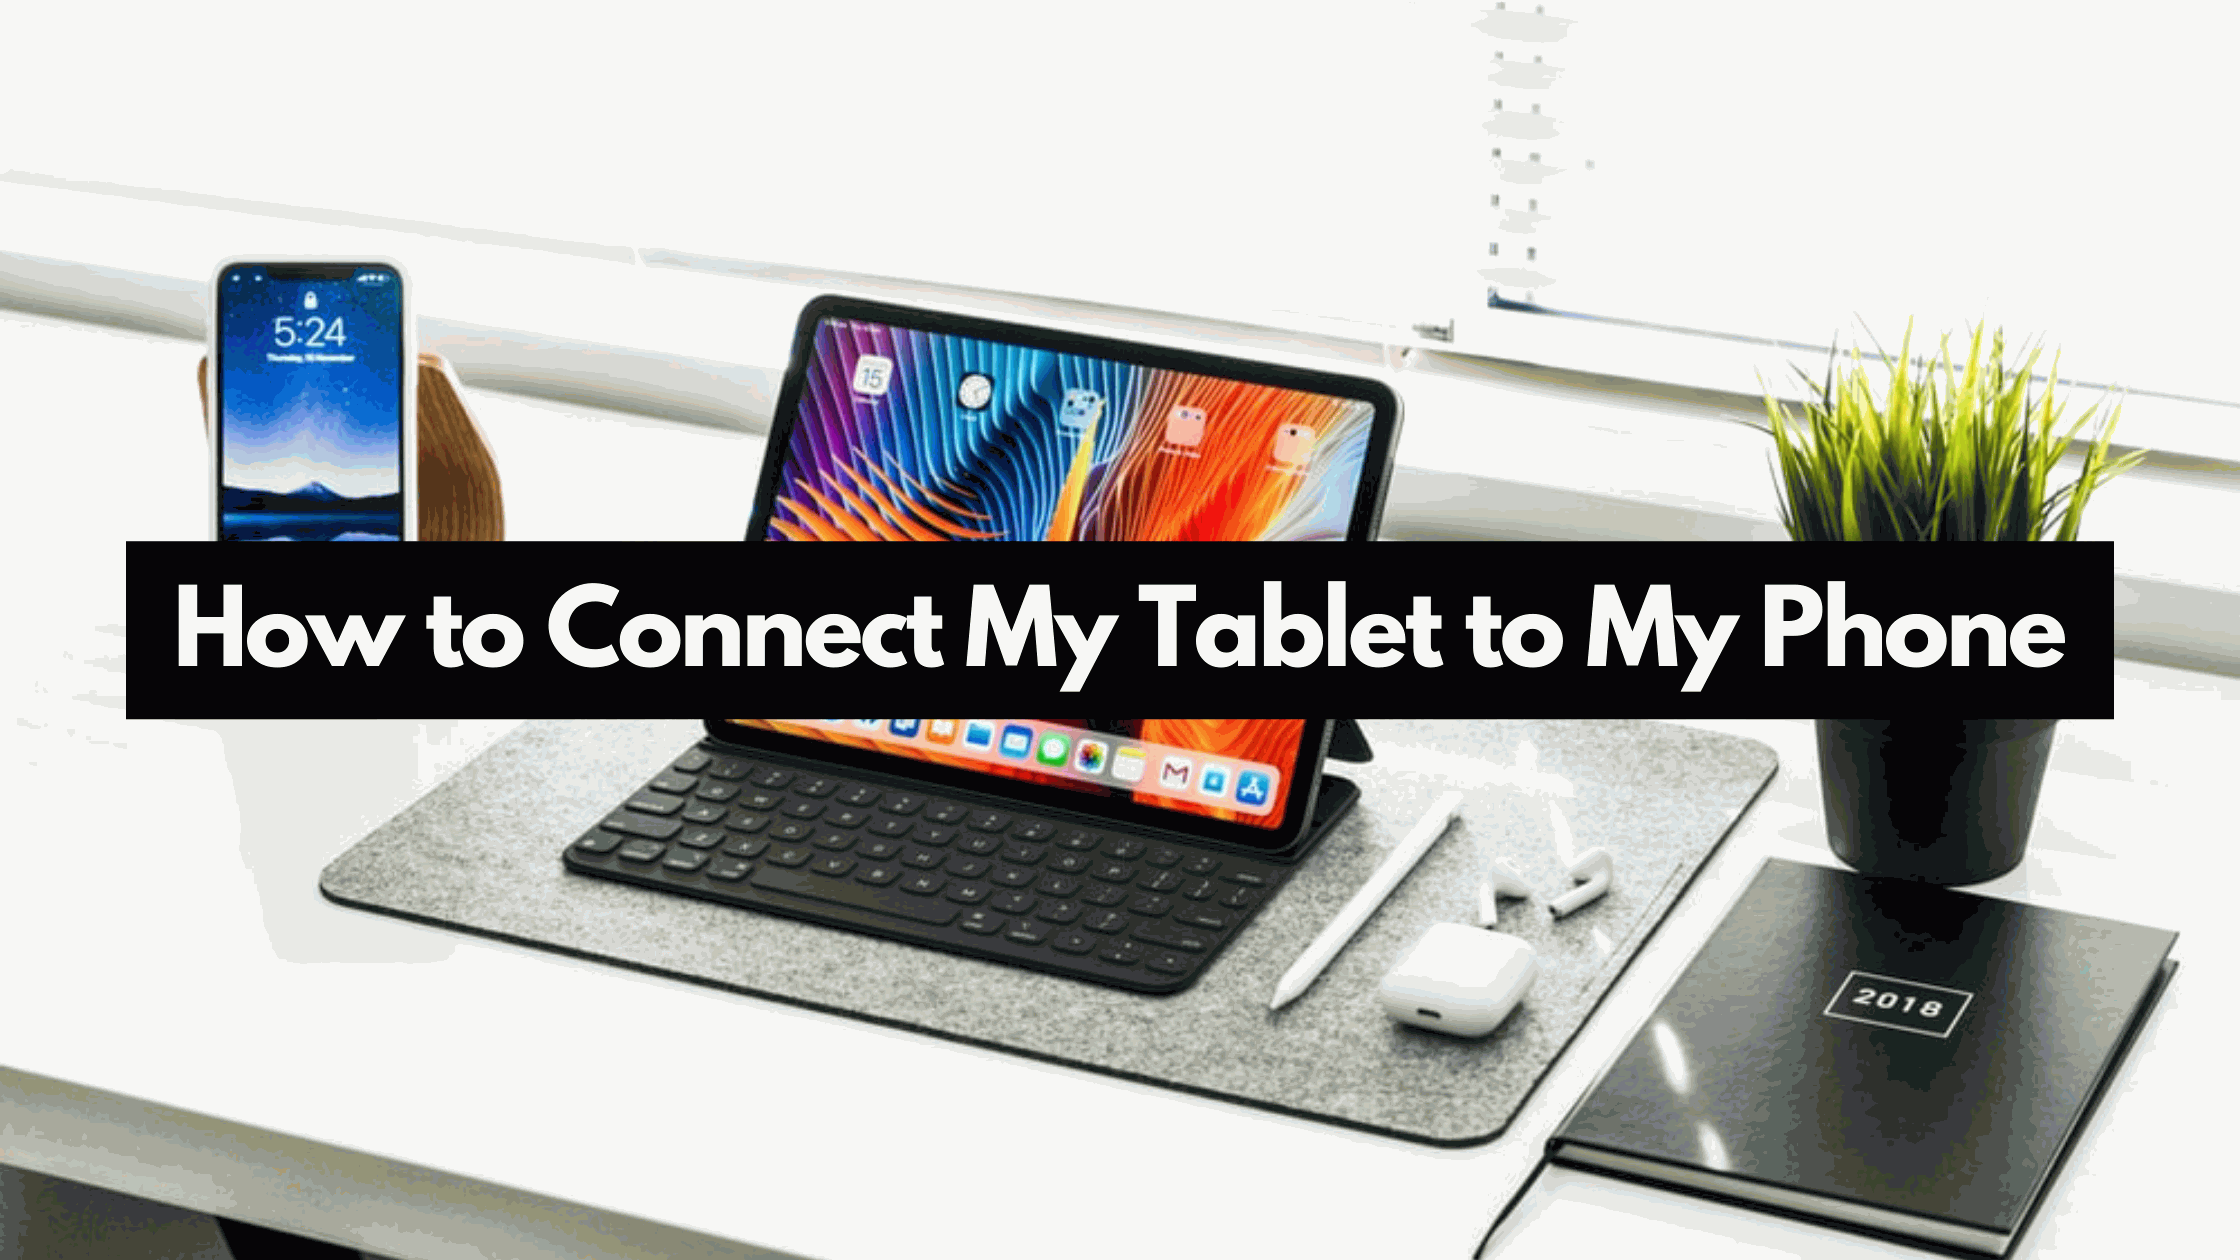 How to Connect My Tablet to My Phone